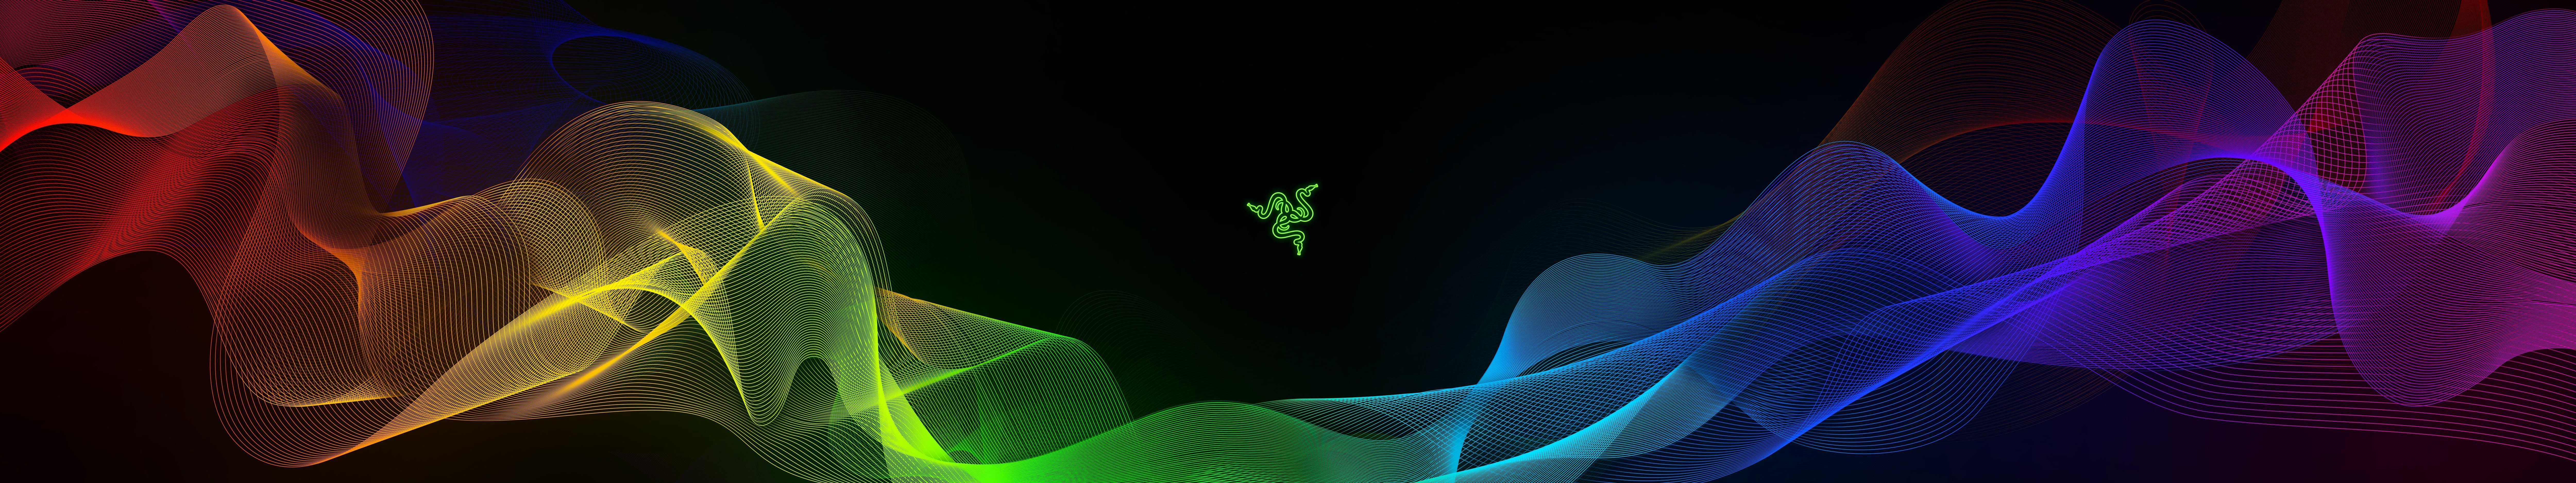 Razer Wallpaper from The 3 Screen Laptop (CES 2017). WALLPAPERS